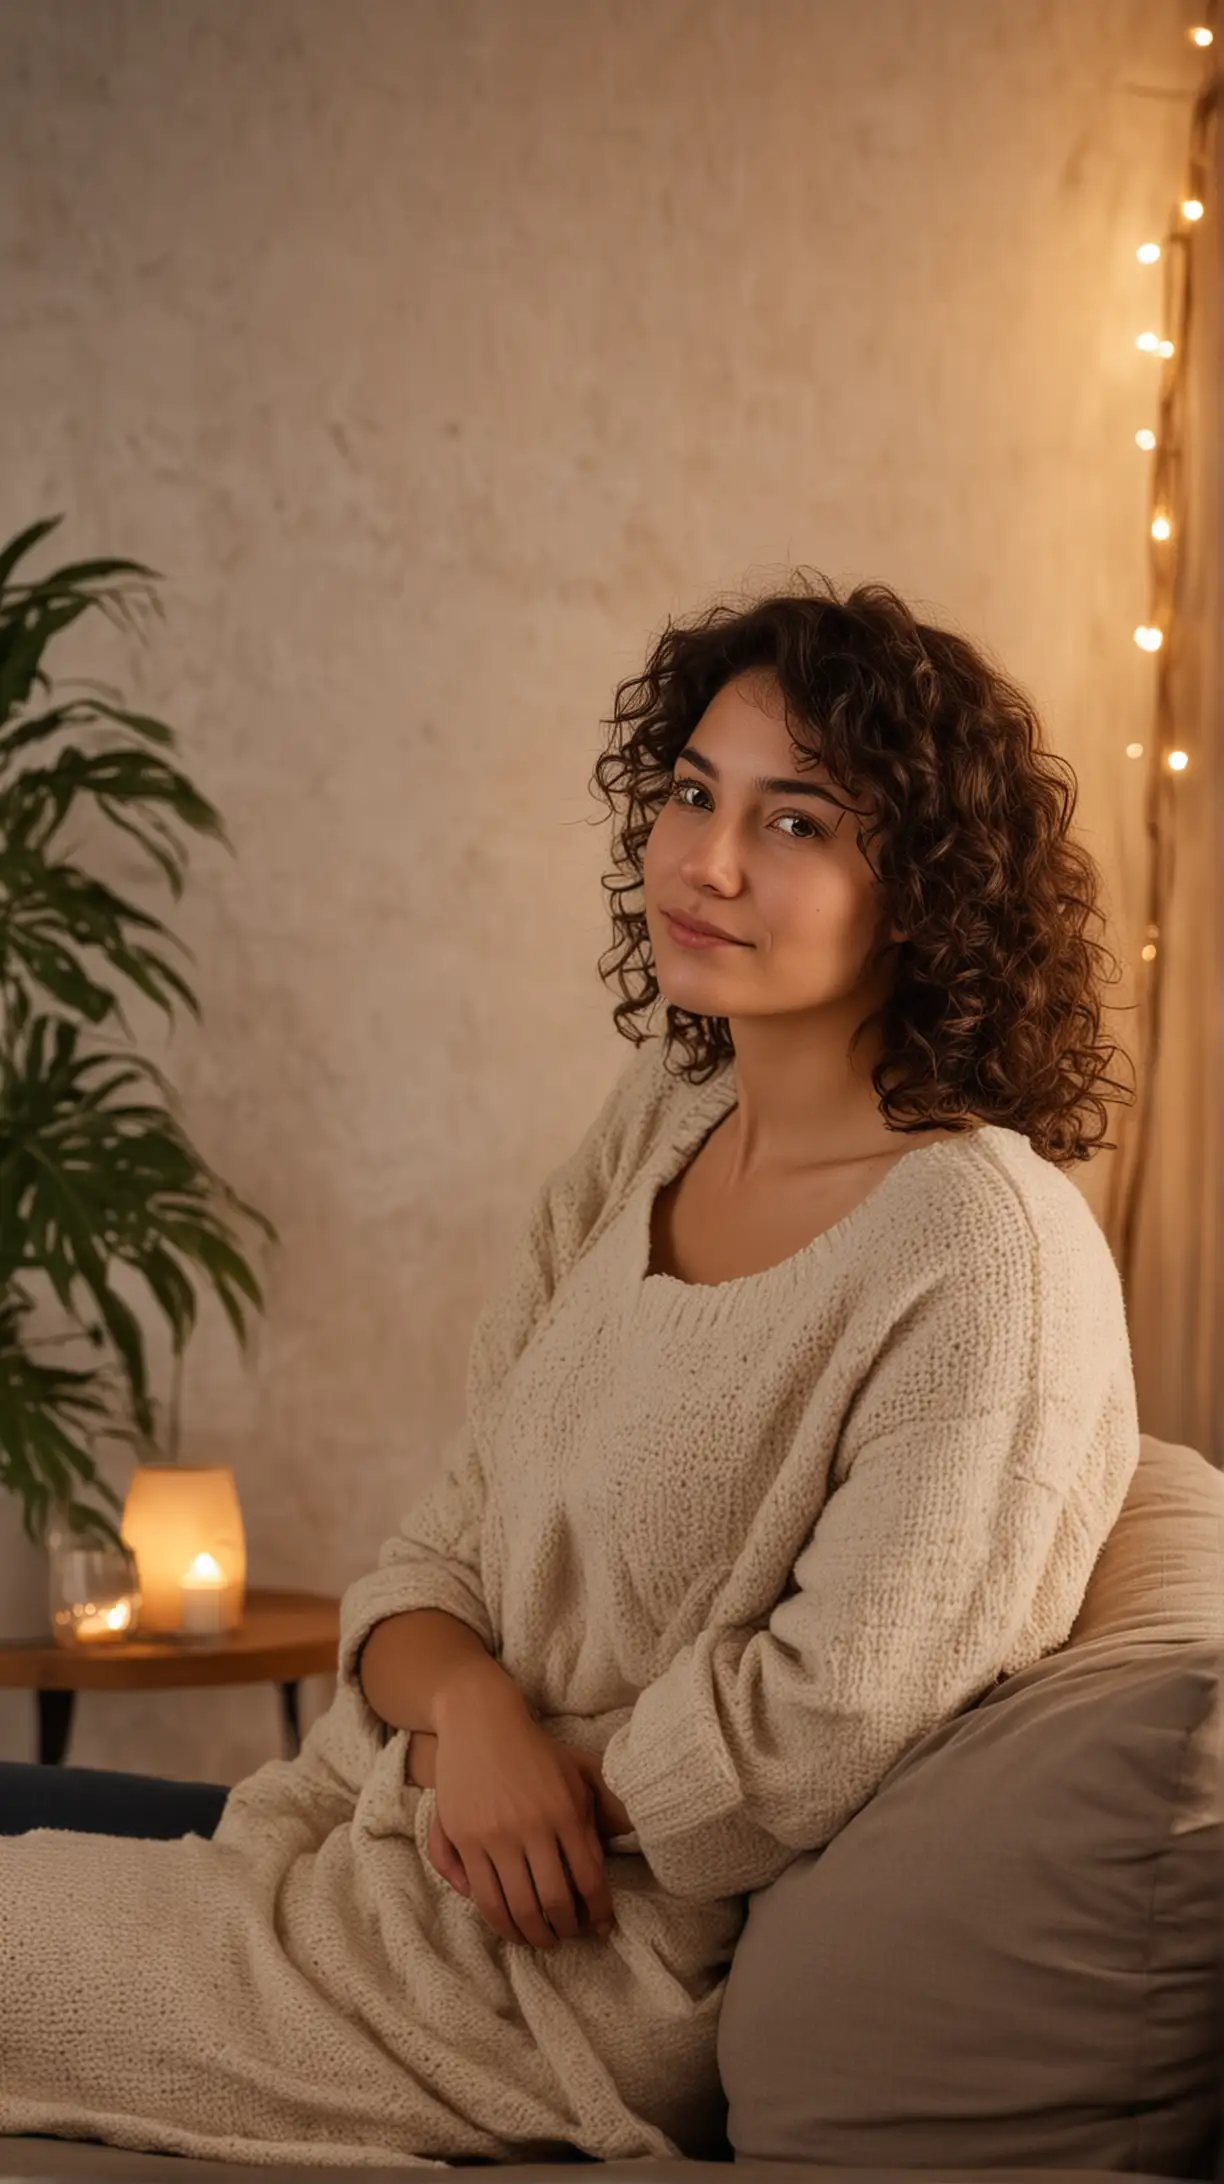 A person sitting comfortably, perhaps on a couch or chair, facing slightly to the side, with a relaxed expression. Background could be a cozy living room setting with soft lighting.